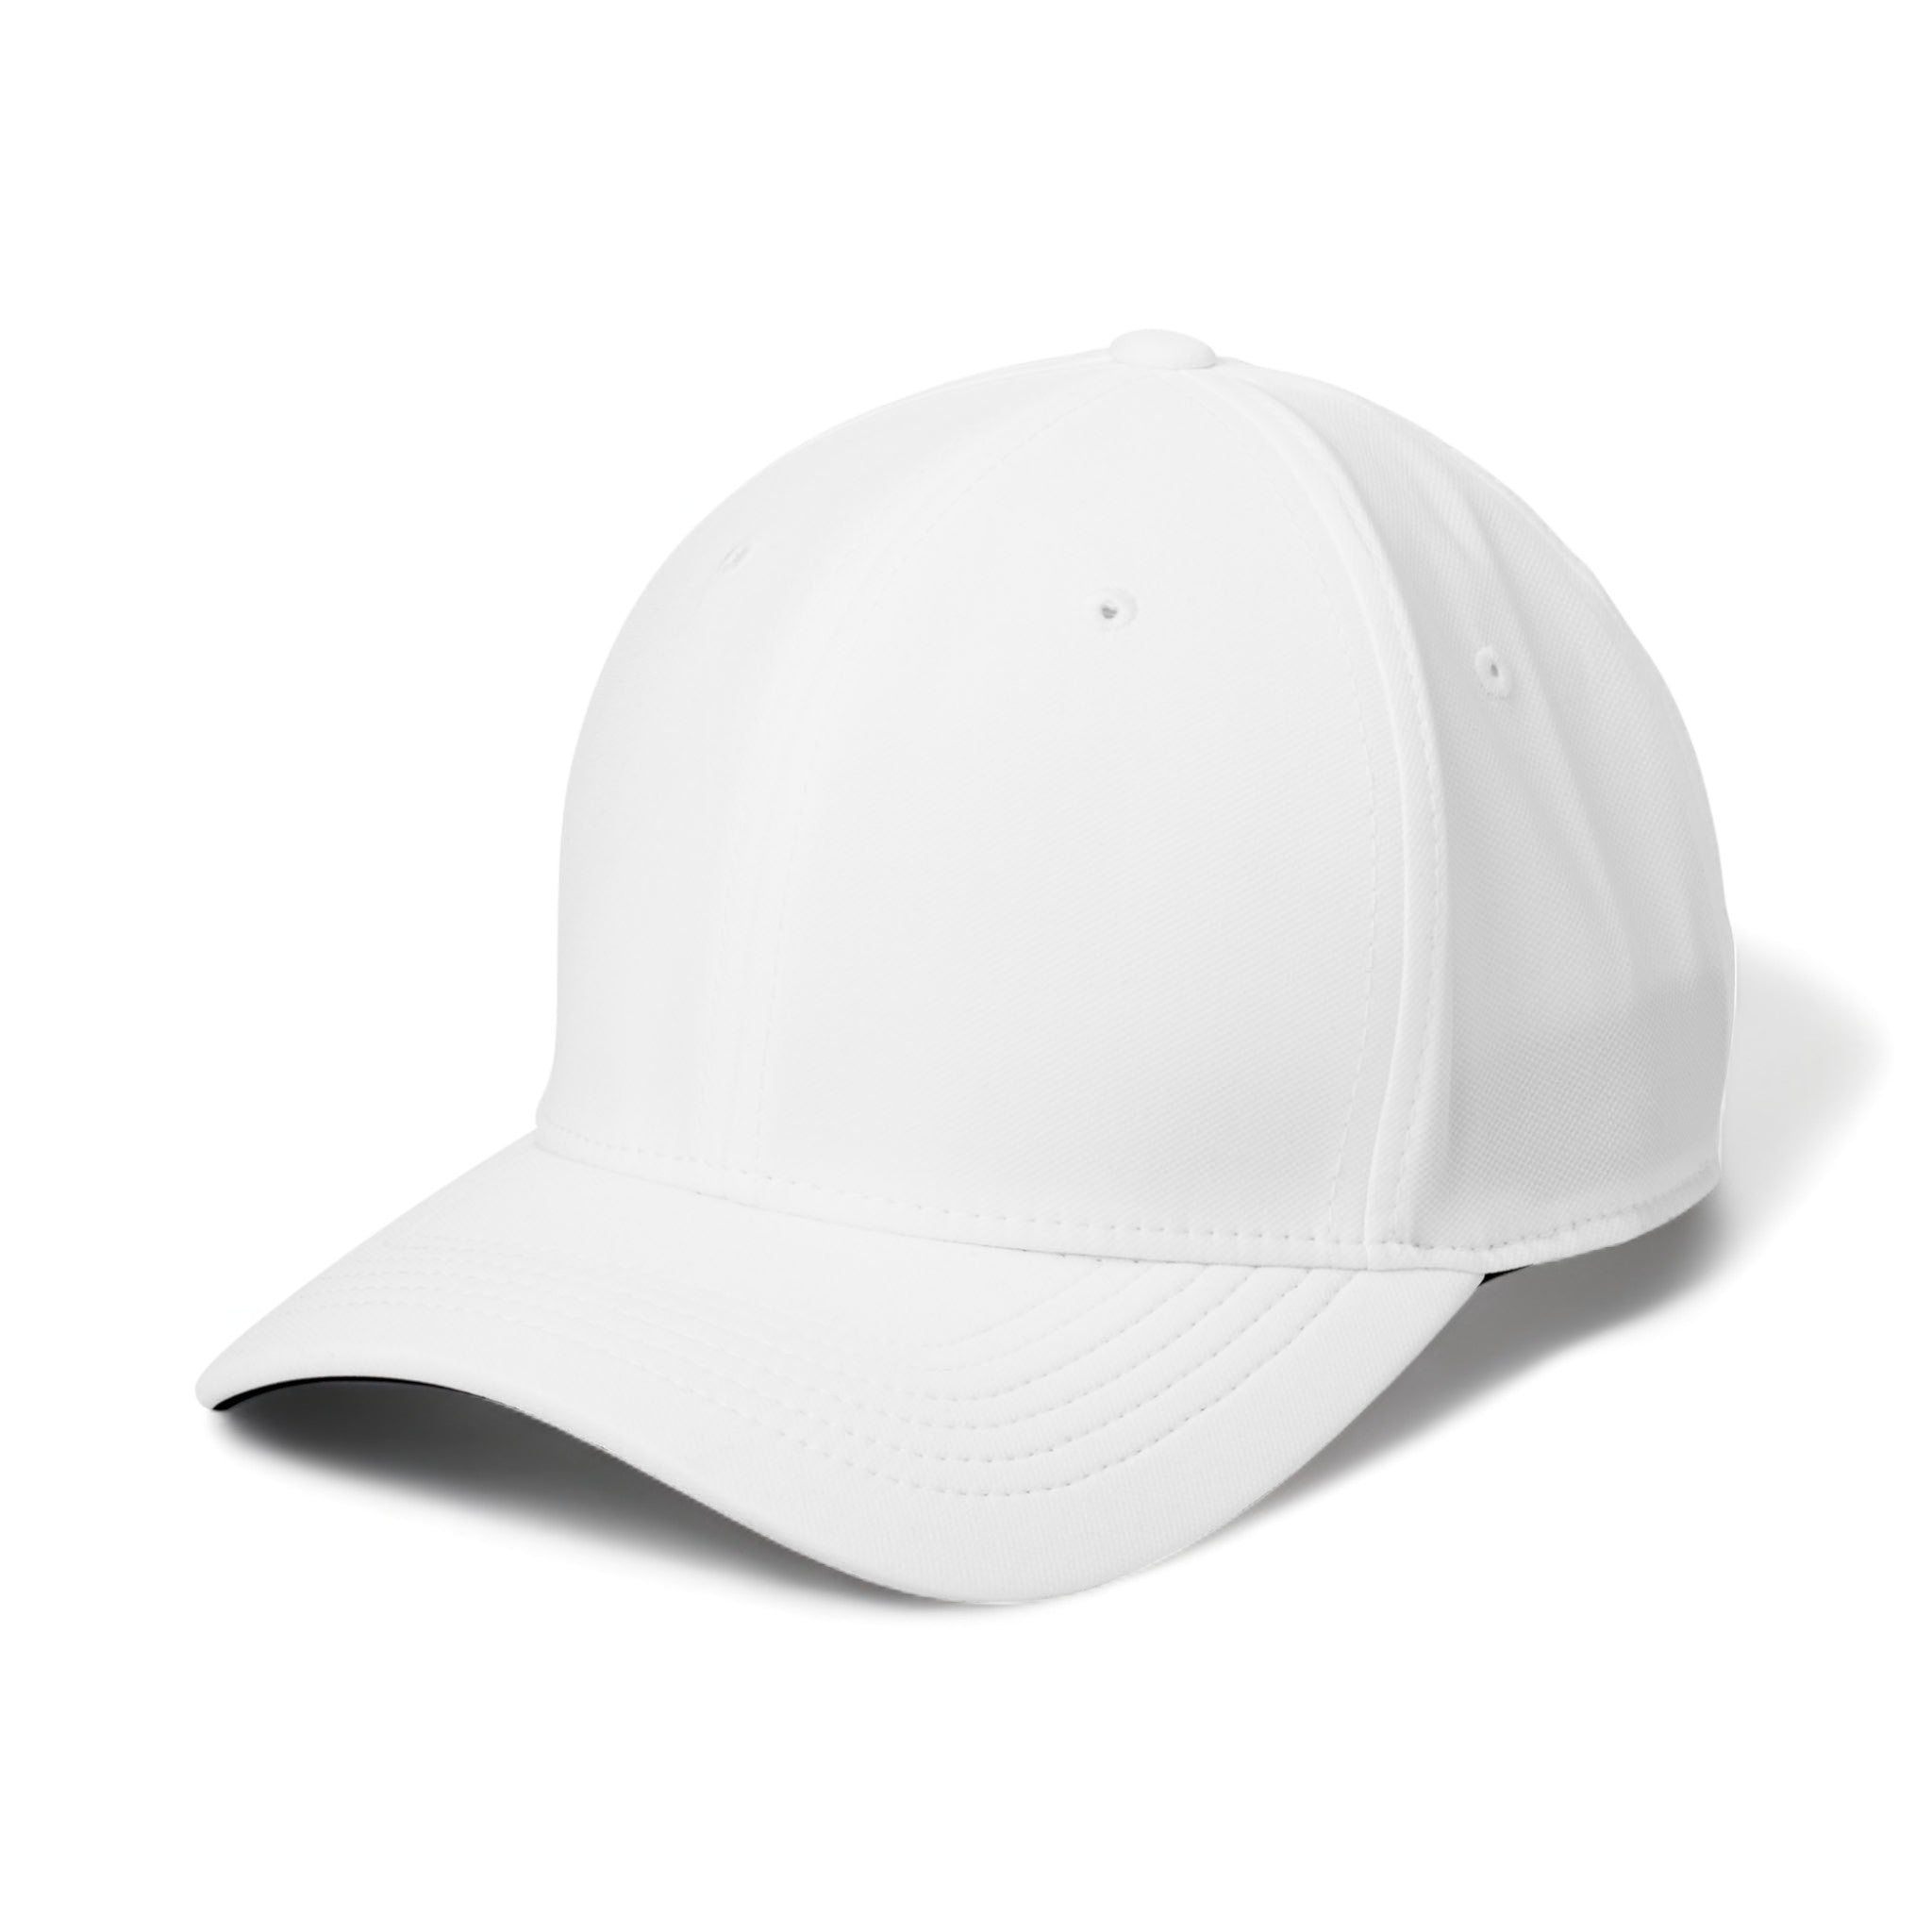 Side view of Nike NKAA1860 custom hat in white and black